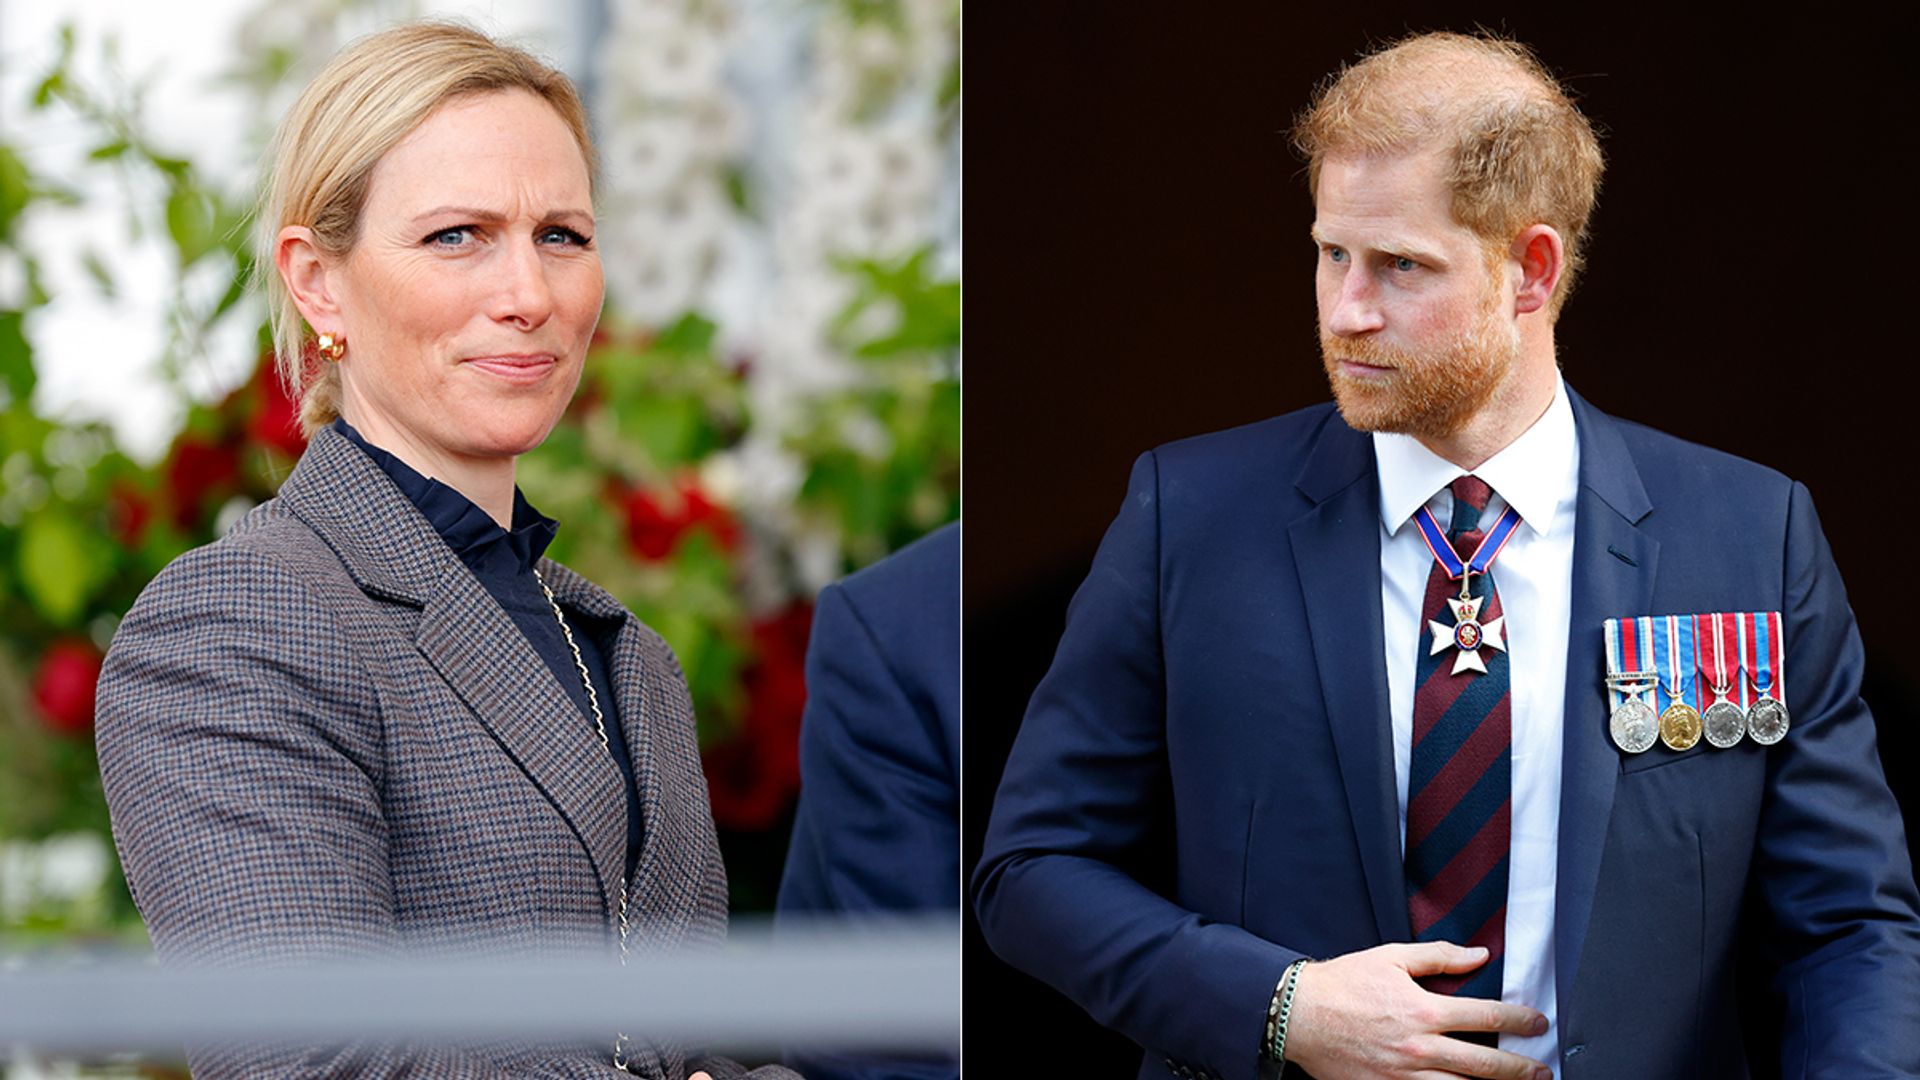 Why Zara Tindall and other royals didn't attend Prince Harry's Invictus service